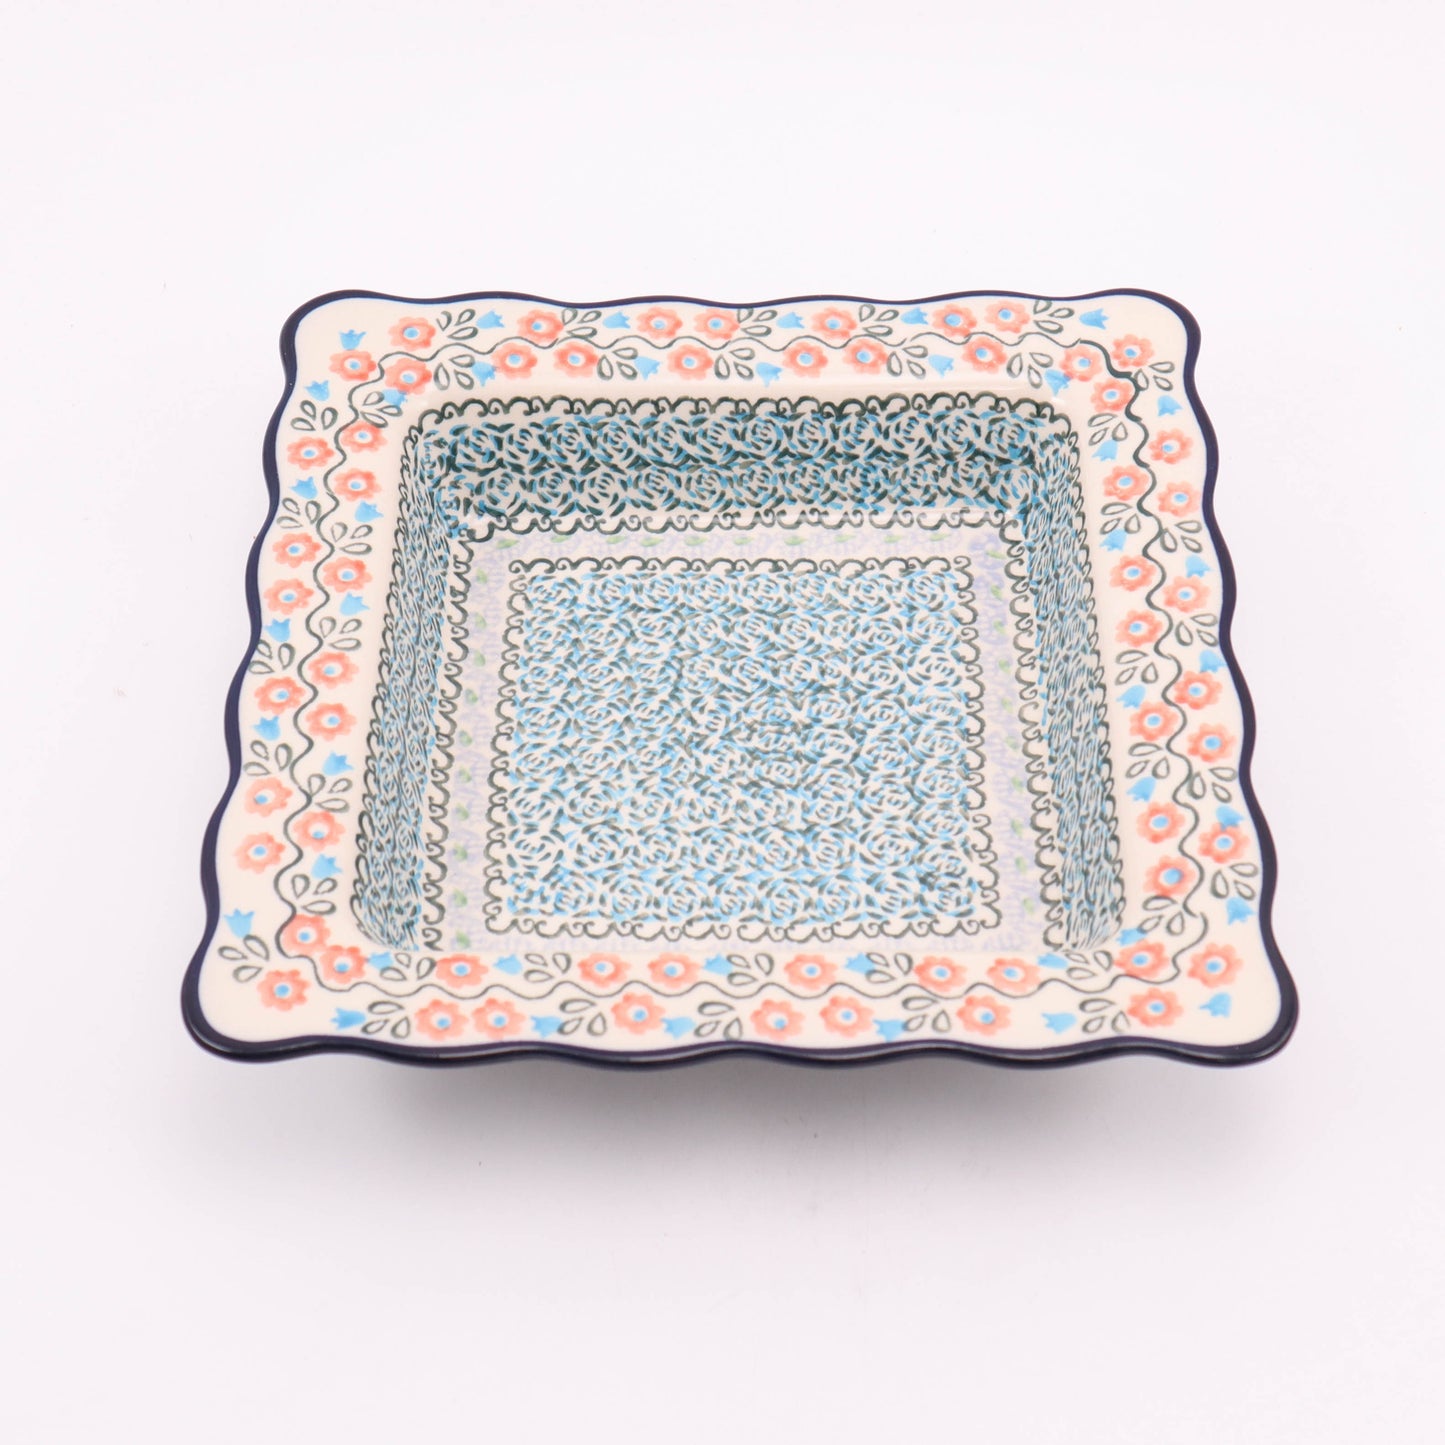 9" Square Ruffled Salad Bowl. Pattern: Happy Hour